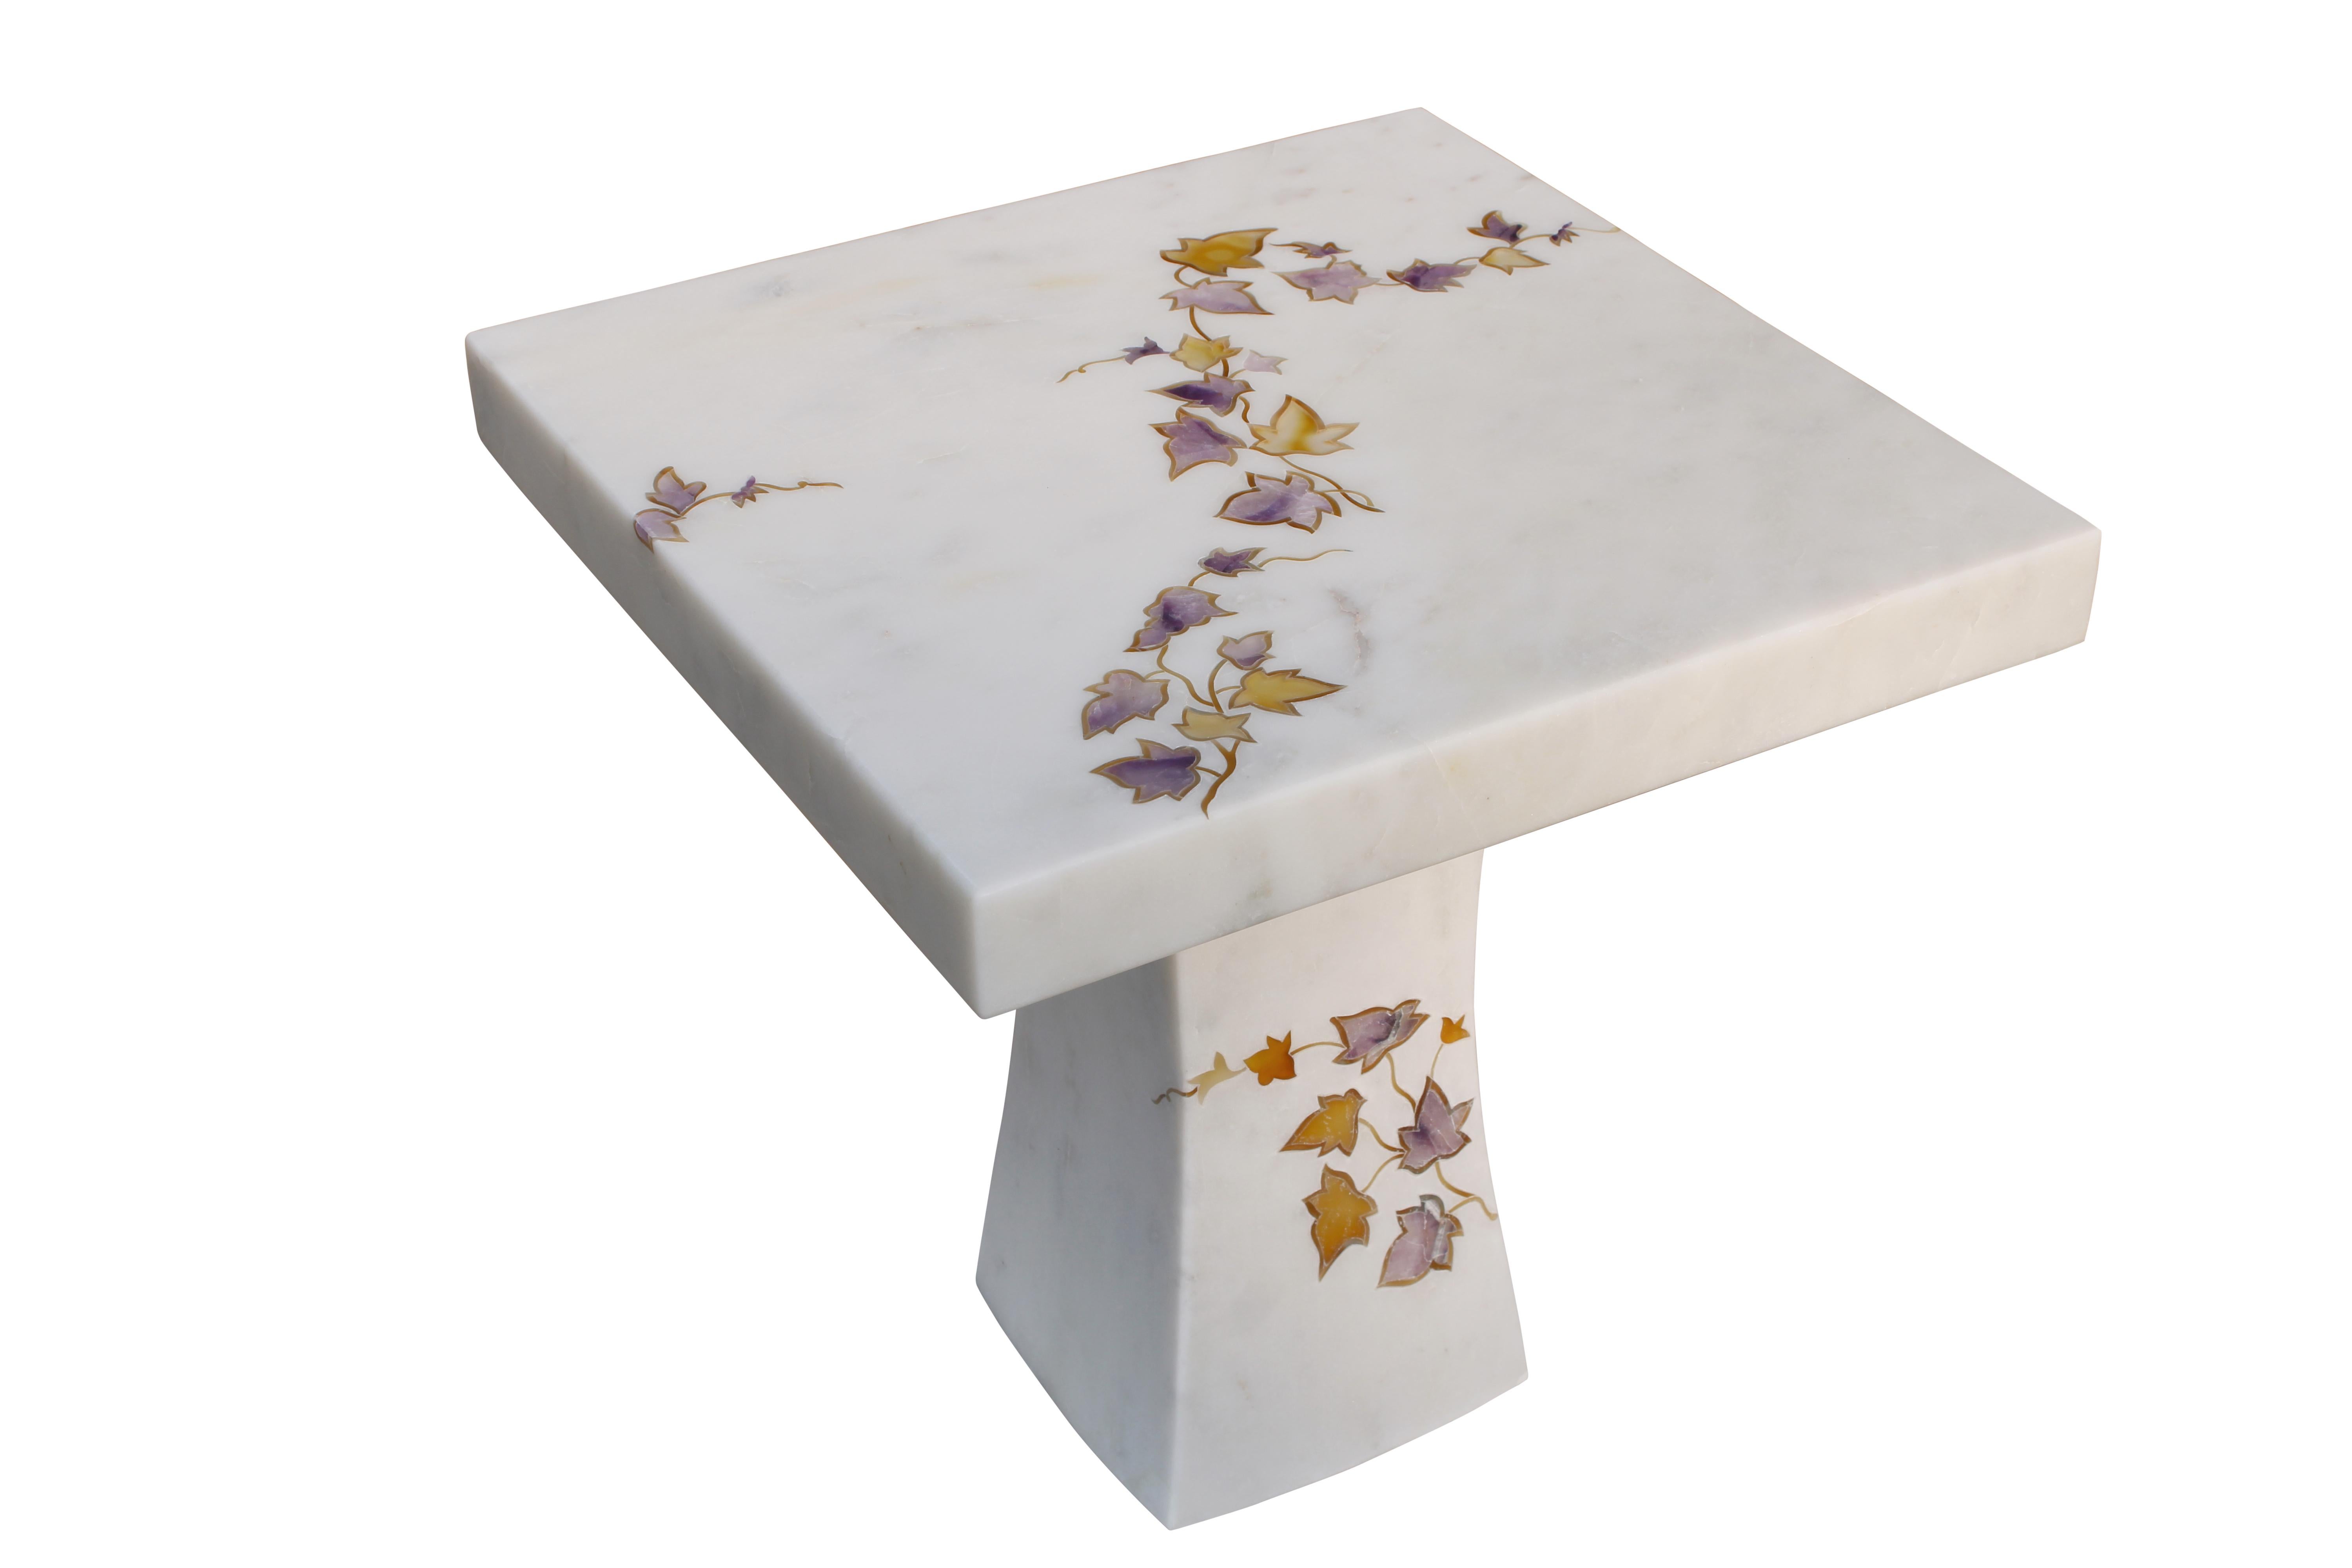 The Ivy table is a part of the Ornamenti collection. Delicately cut pieces of agate, tiger eyes, mother of pearl and other semi precious stones are carefully inlaid into the base stone by our master craftsmen. The collection features modern designs